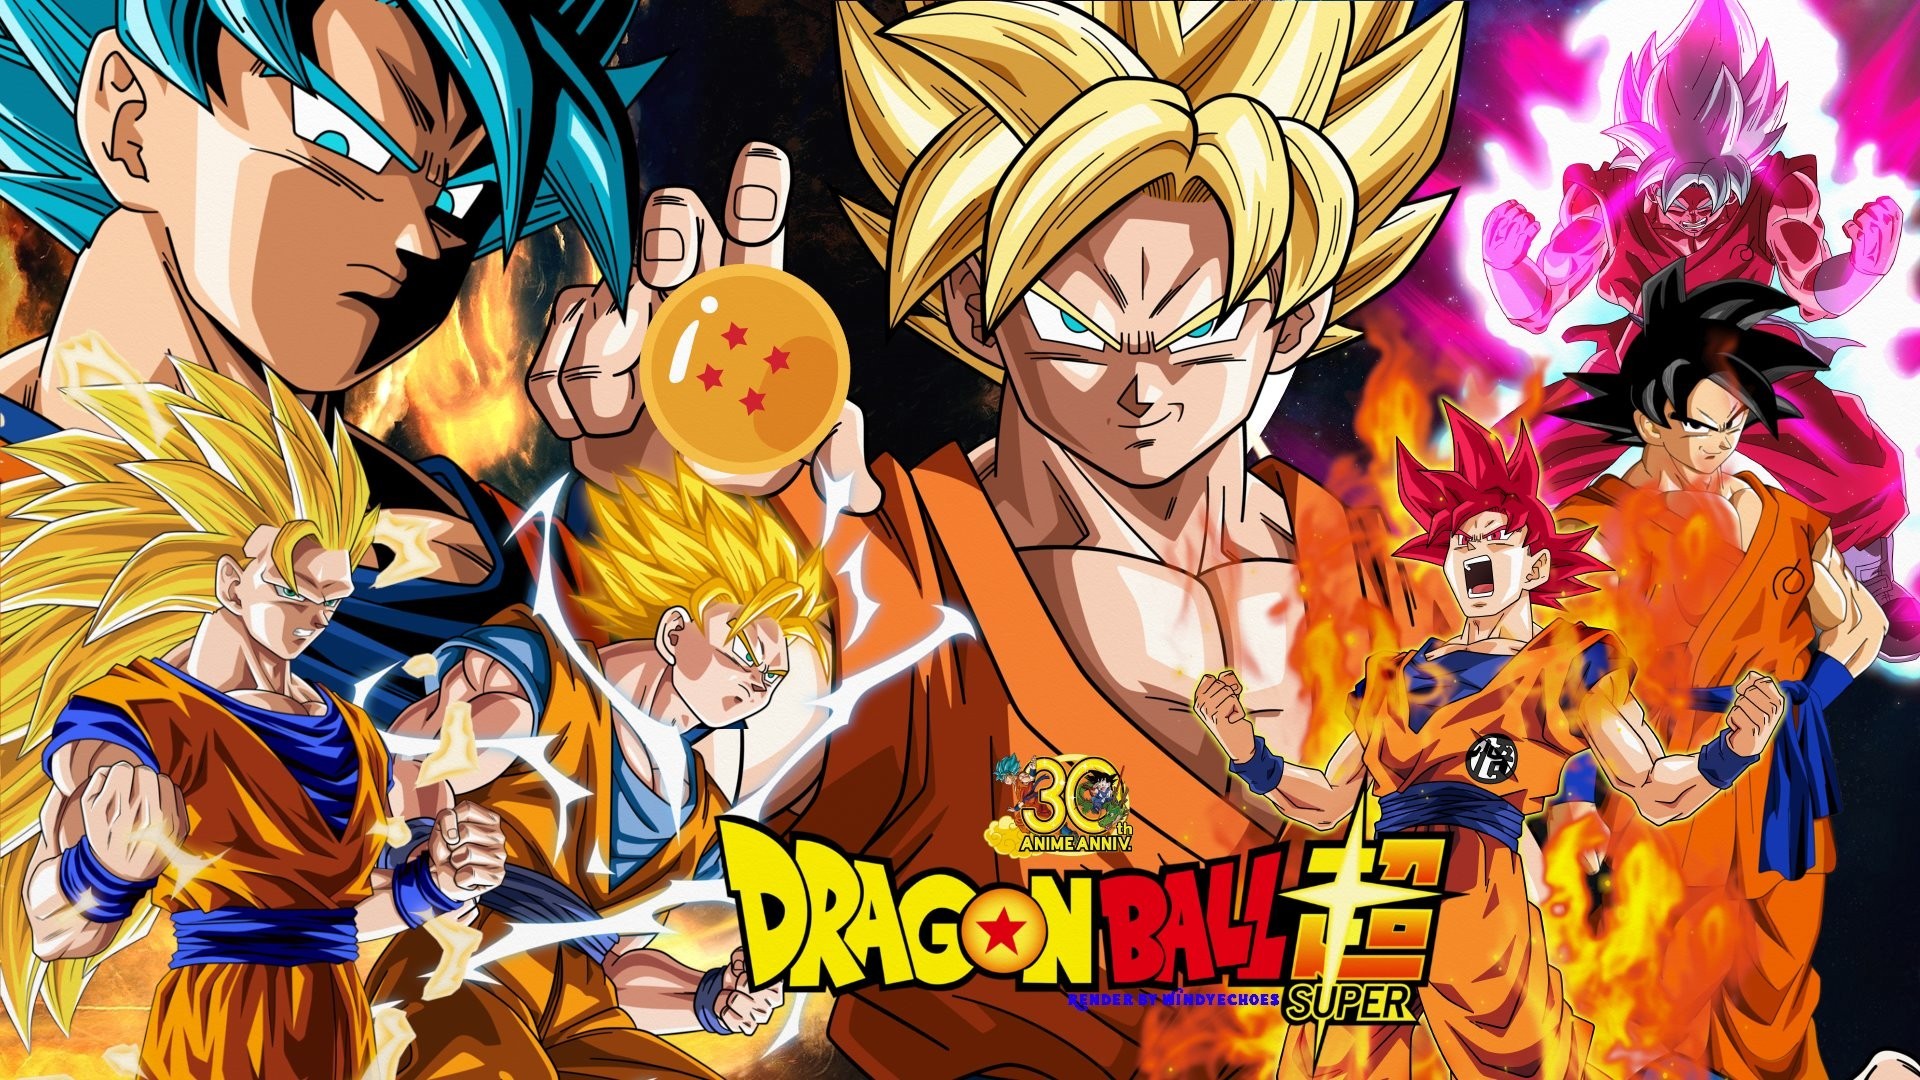 Goku HD Wallpaper With Resolution 1920X1080 pixel. You can make this wallpaper for your Desktop Computer Backgrounds, Mac Wallpapers, Android Lock screen or iPhone Screensavers